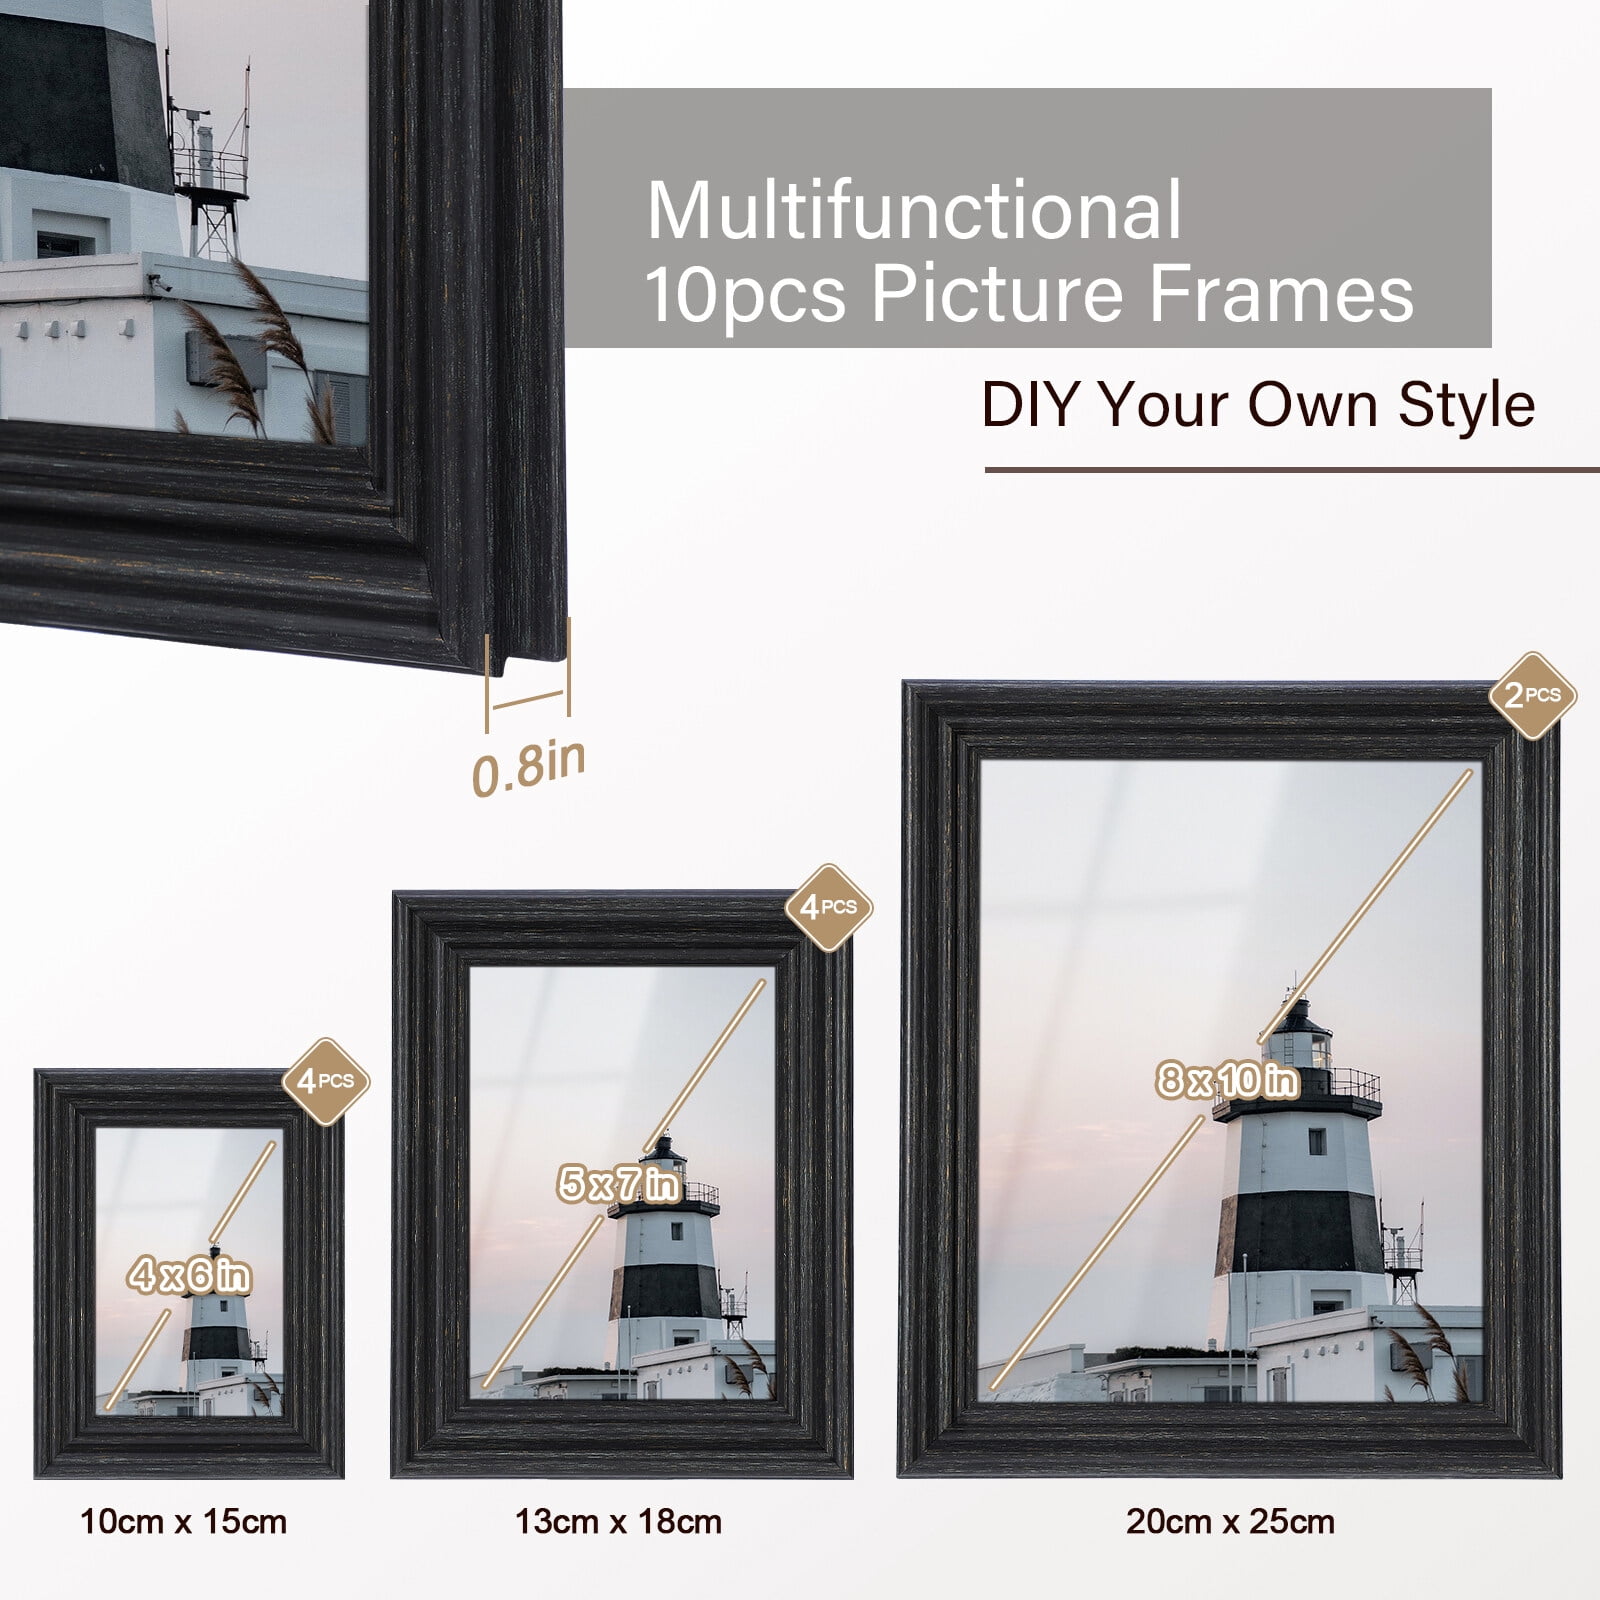 Set of 6 Individual Photo Frame for Home Wall Decoration (Size - 4 x 6, 6 x  10 Inches)